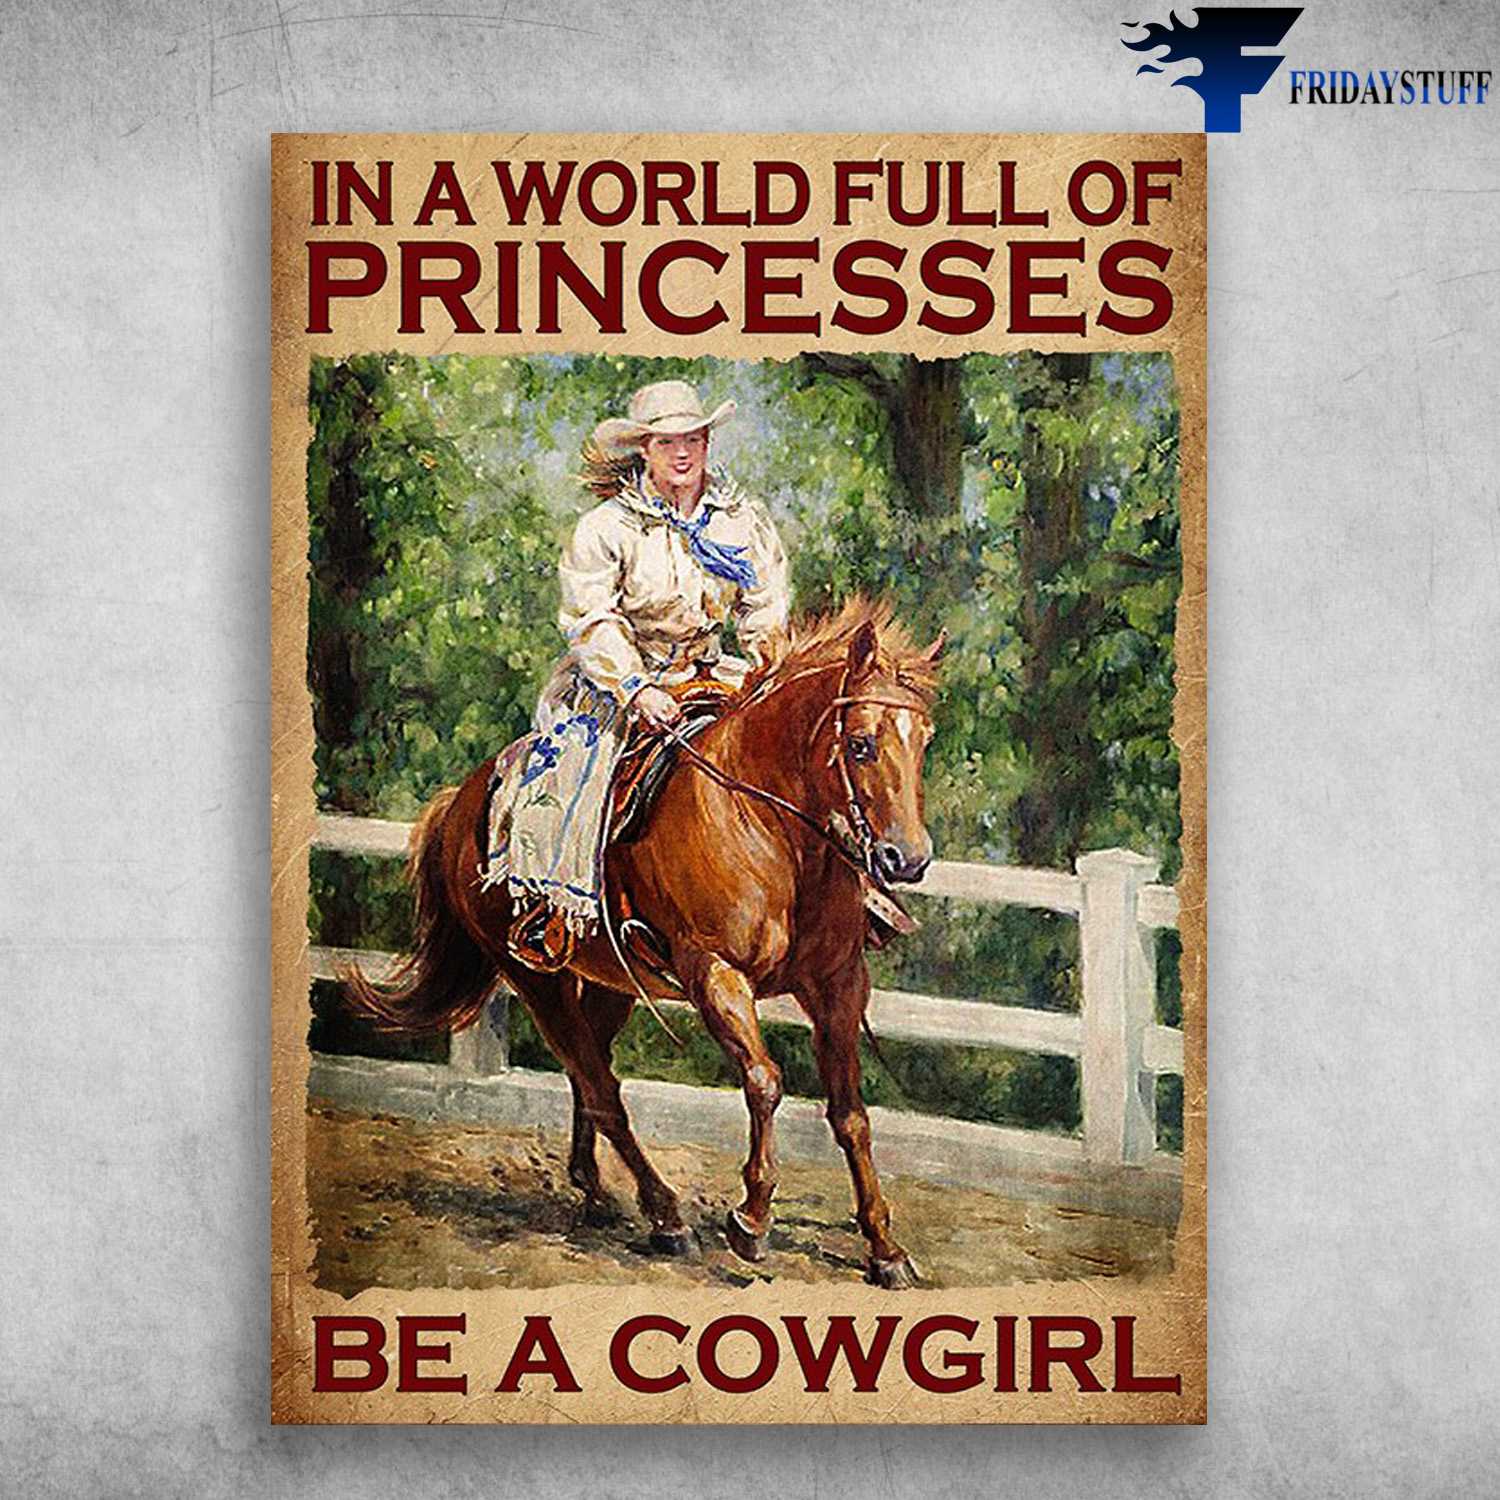 Cowgirl Riding Horse - In A World Full Of Princesses, Be A Cowgirl